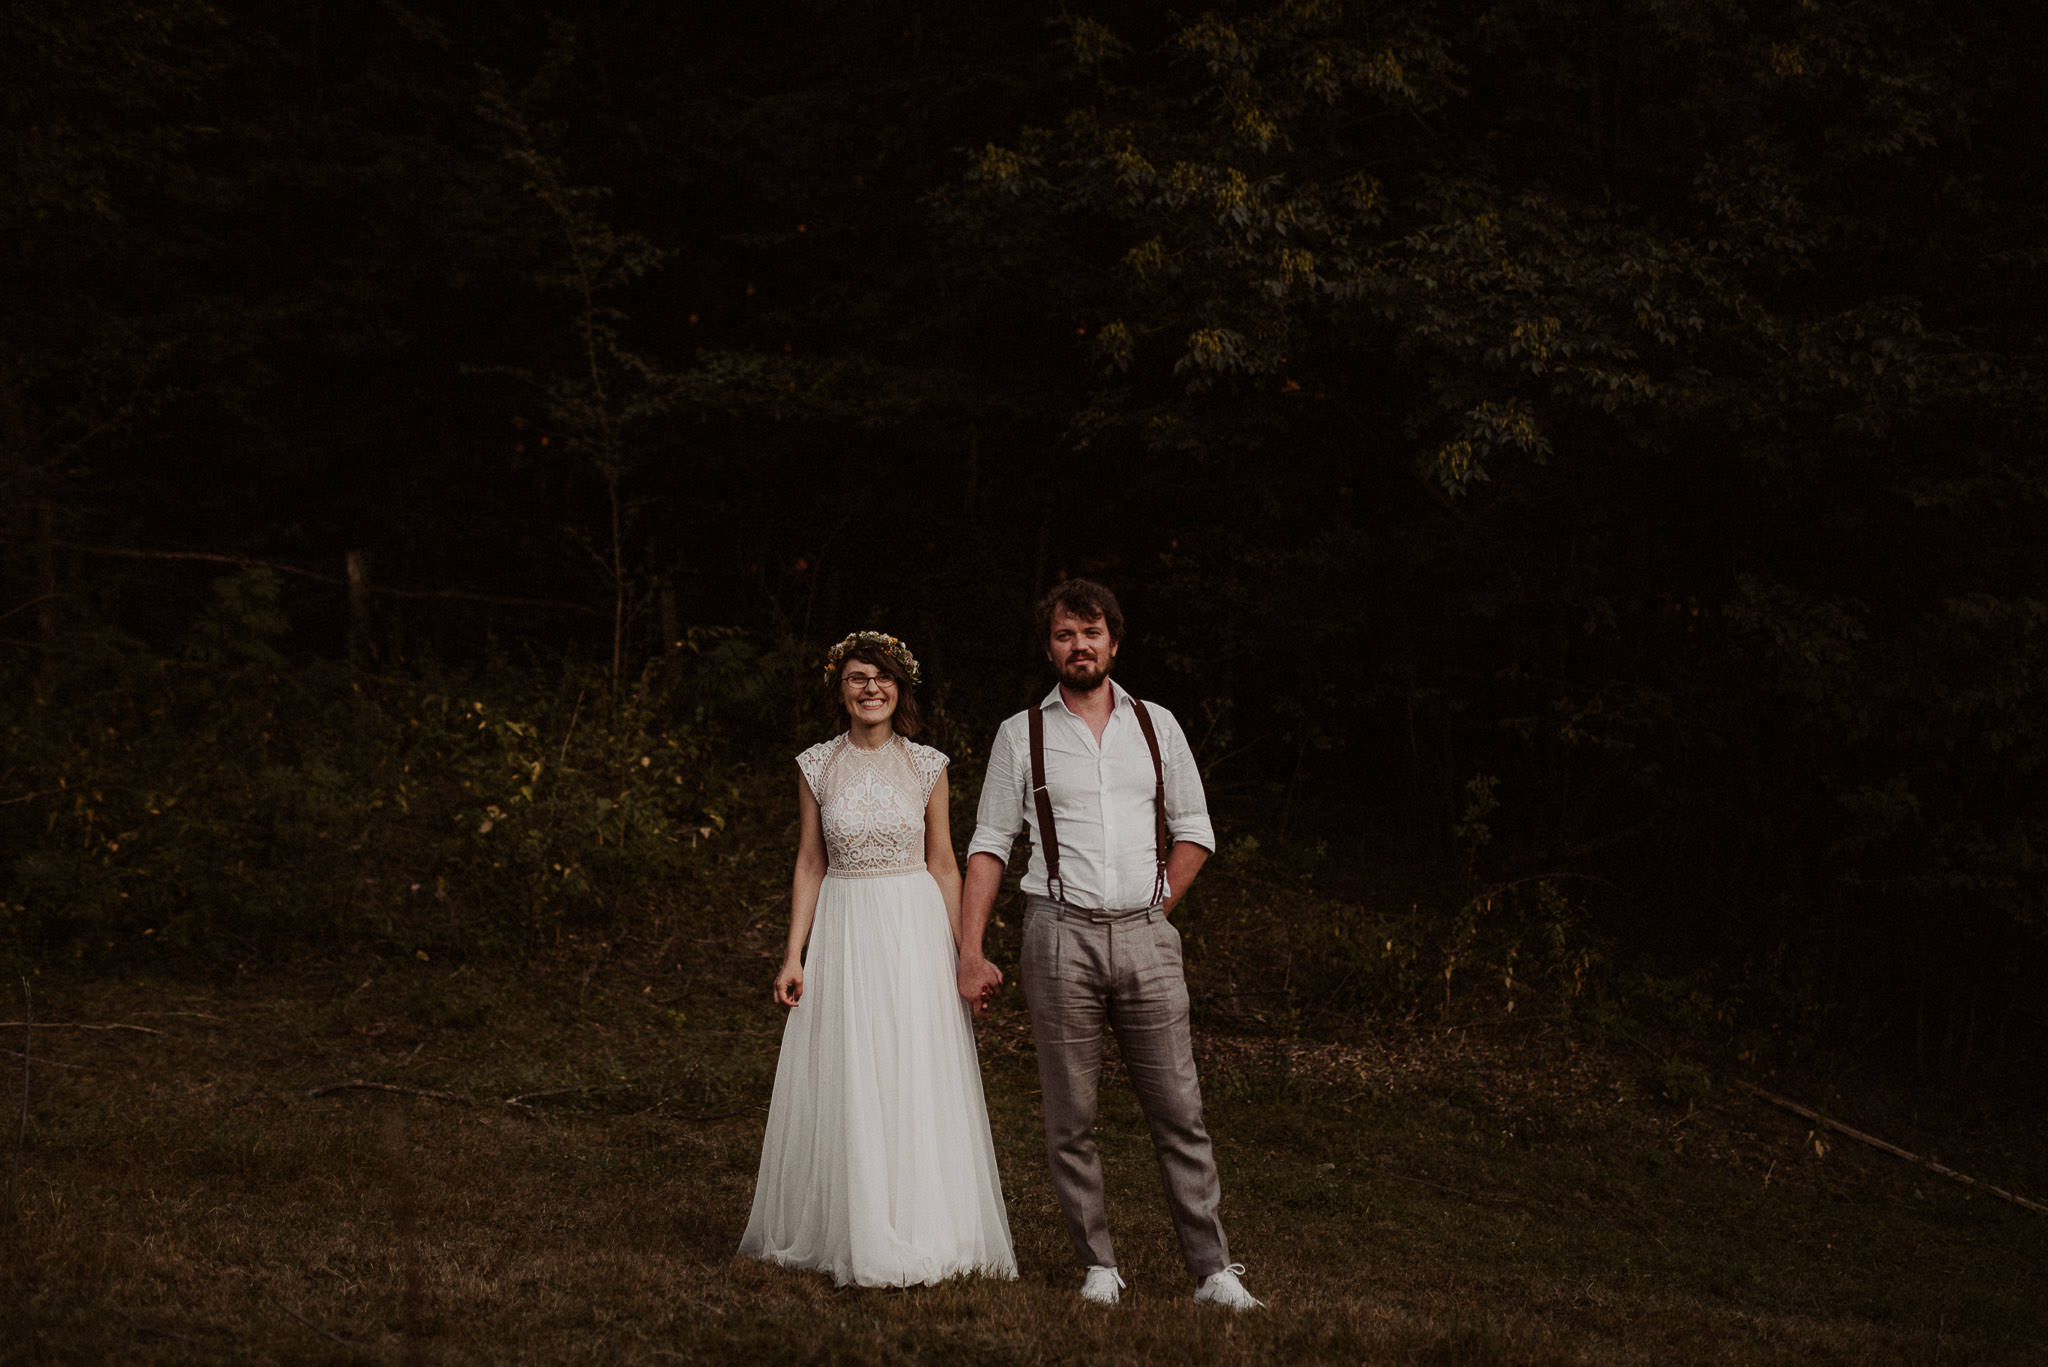 wedding couple during their traditional rustic wedding in a forest